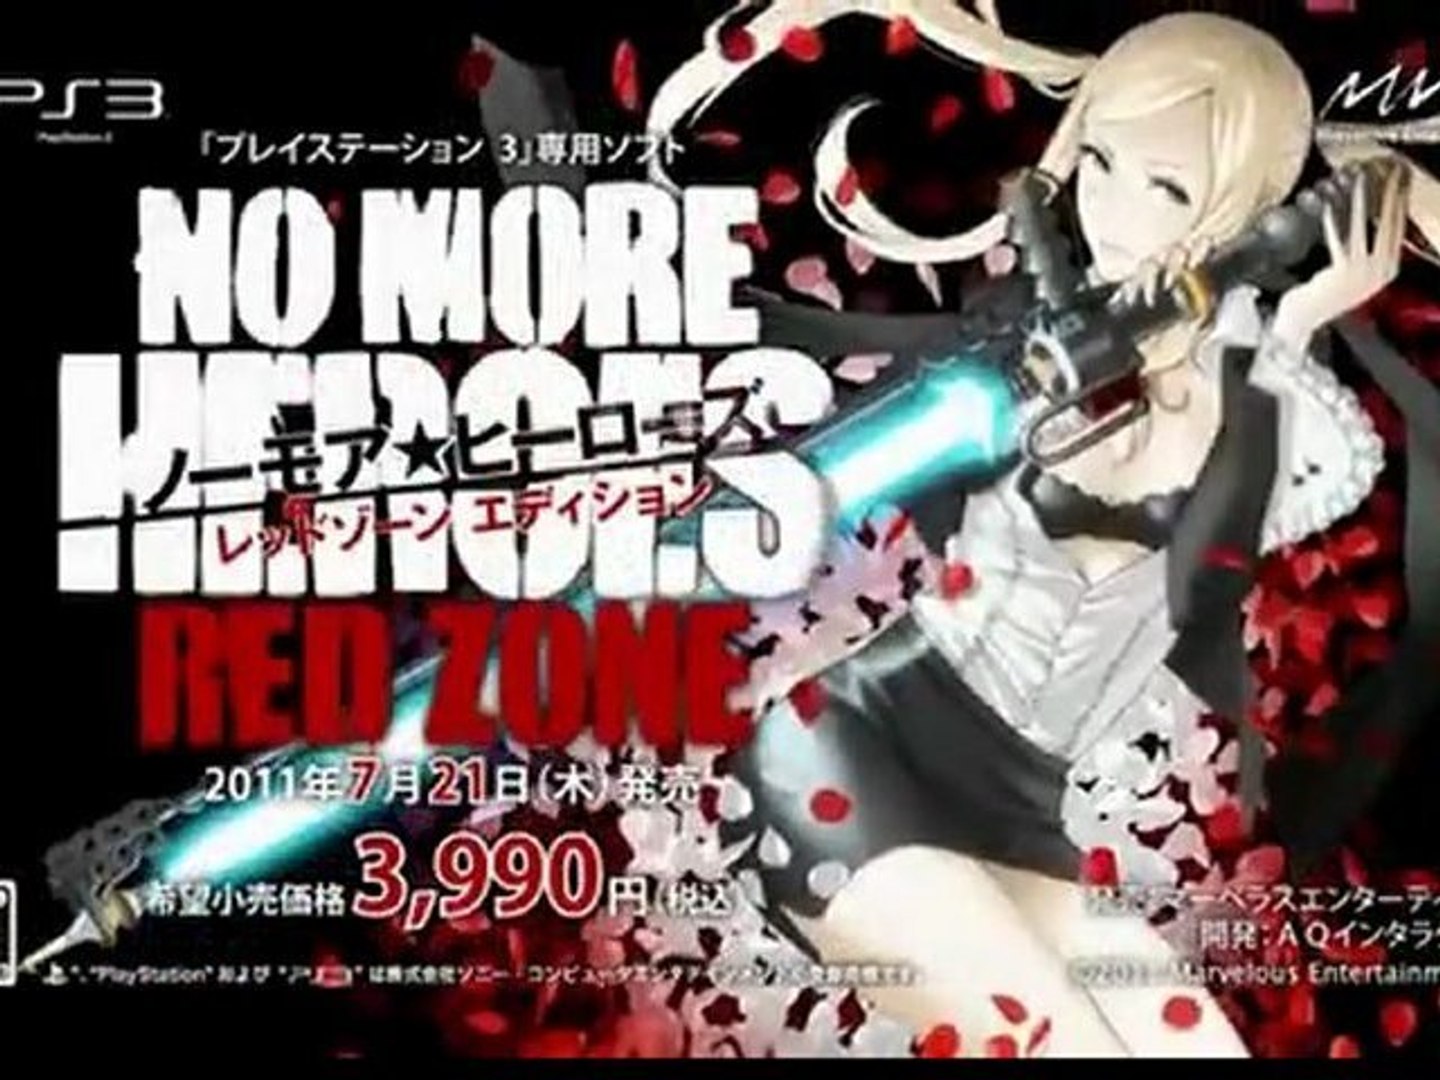 No More Heroes - PS3 "Red Zone Edition" Trailer [HQ] - Vidéo Dailymotion